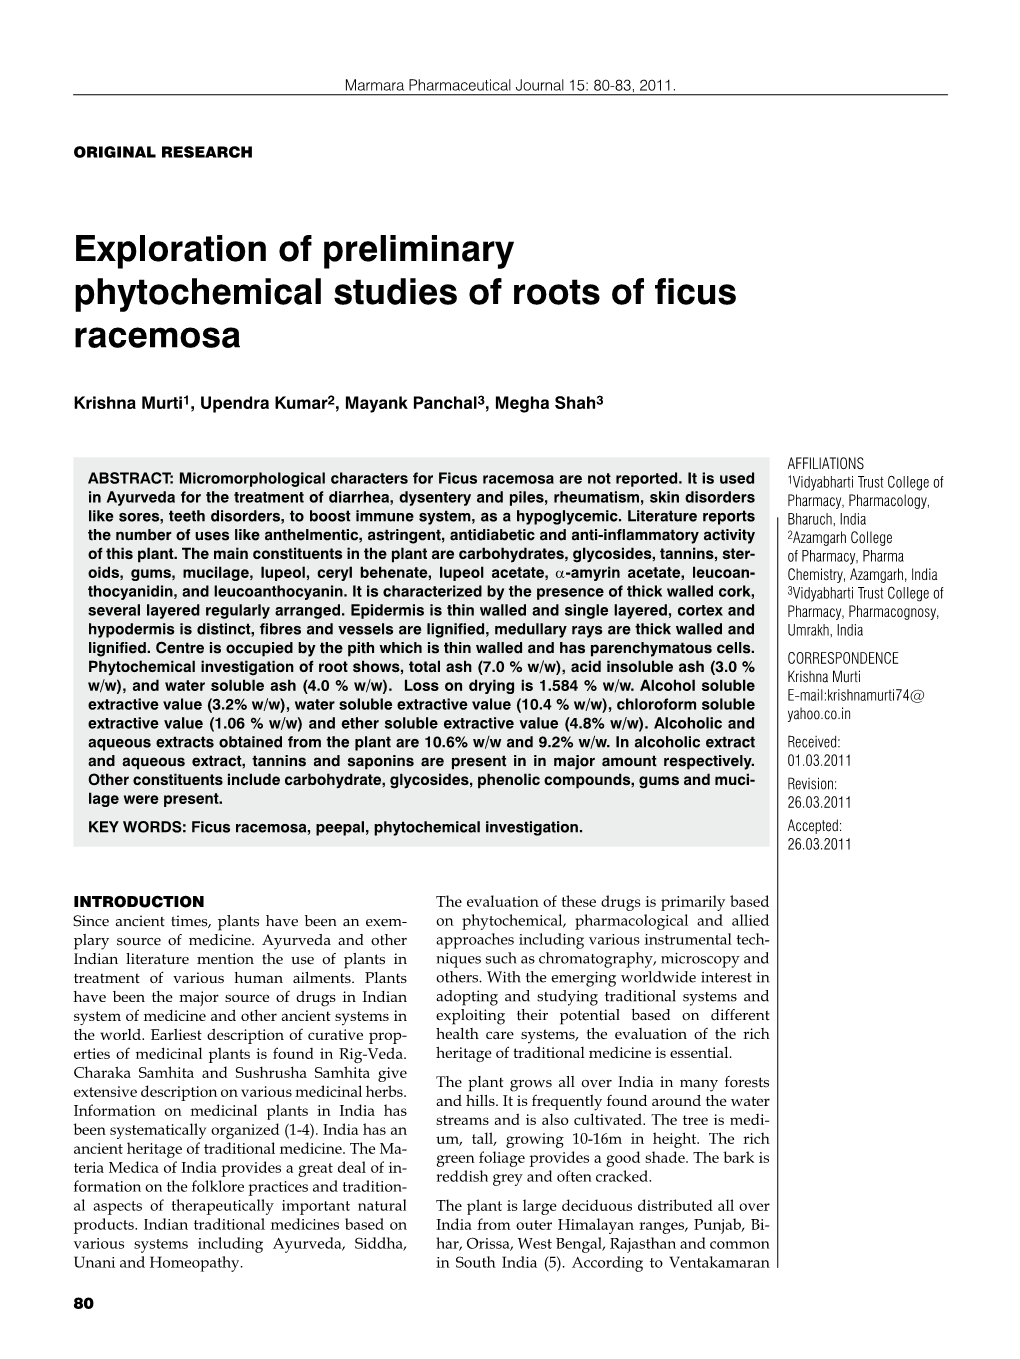 Exploration of Preliminary Phytochemical Studies of Roots of Ficus Racemosa